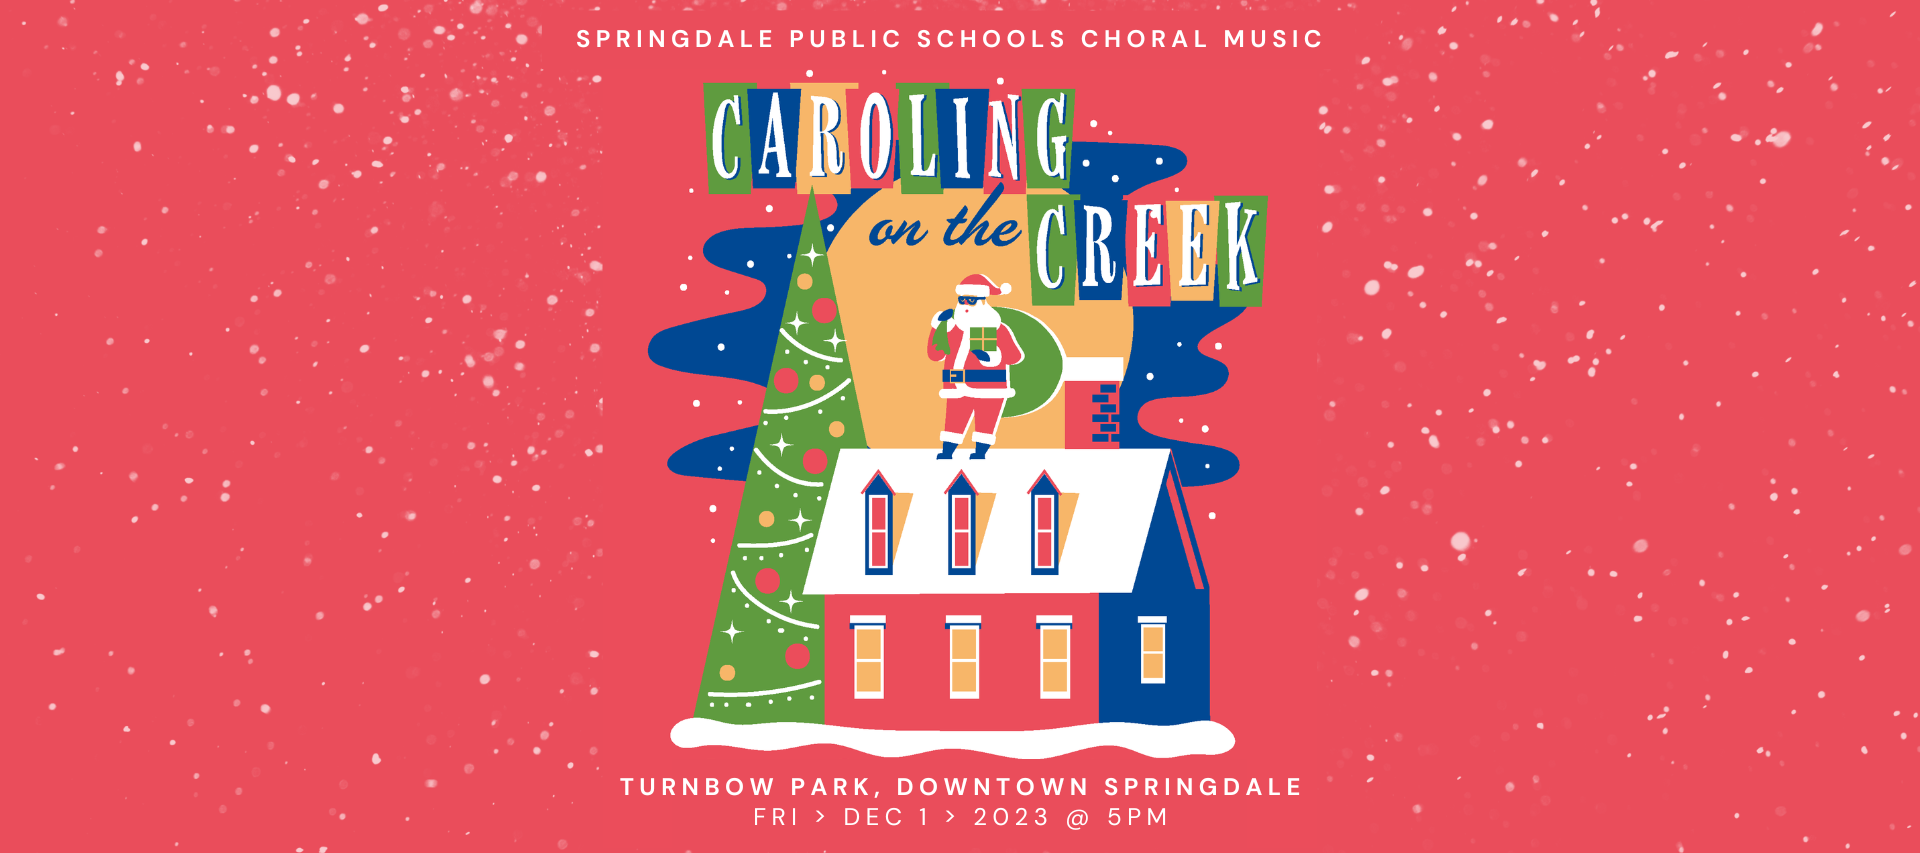 Caroling on the Creek Promotional Banner Graphic with a December 2nd Event Date